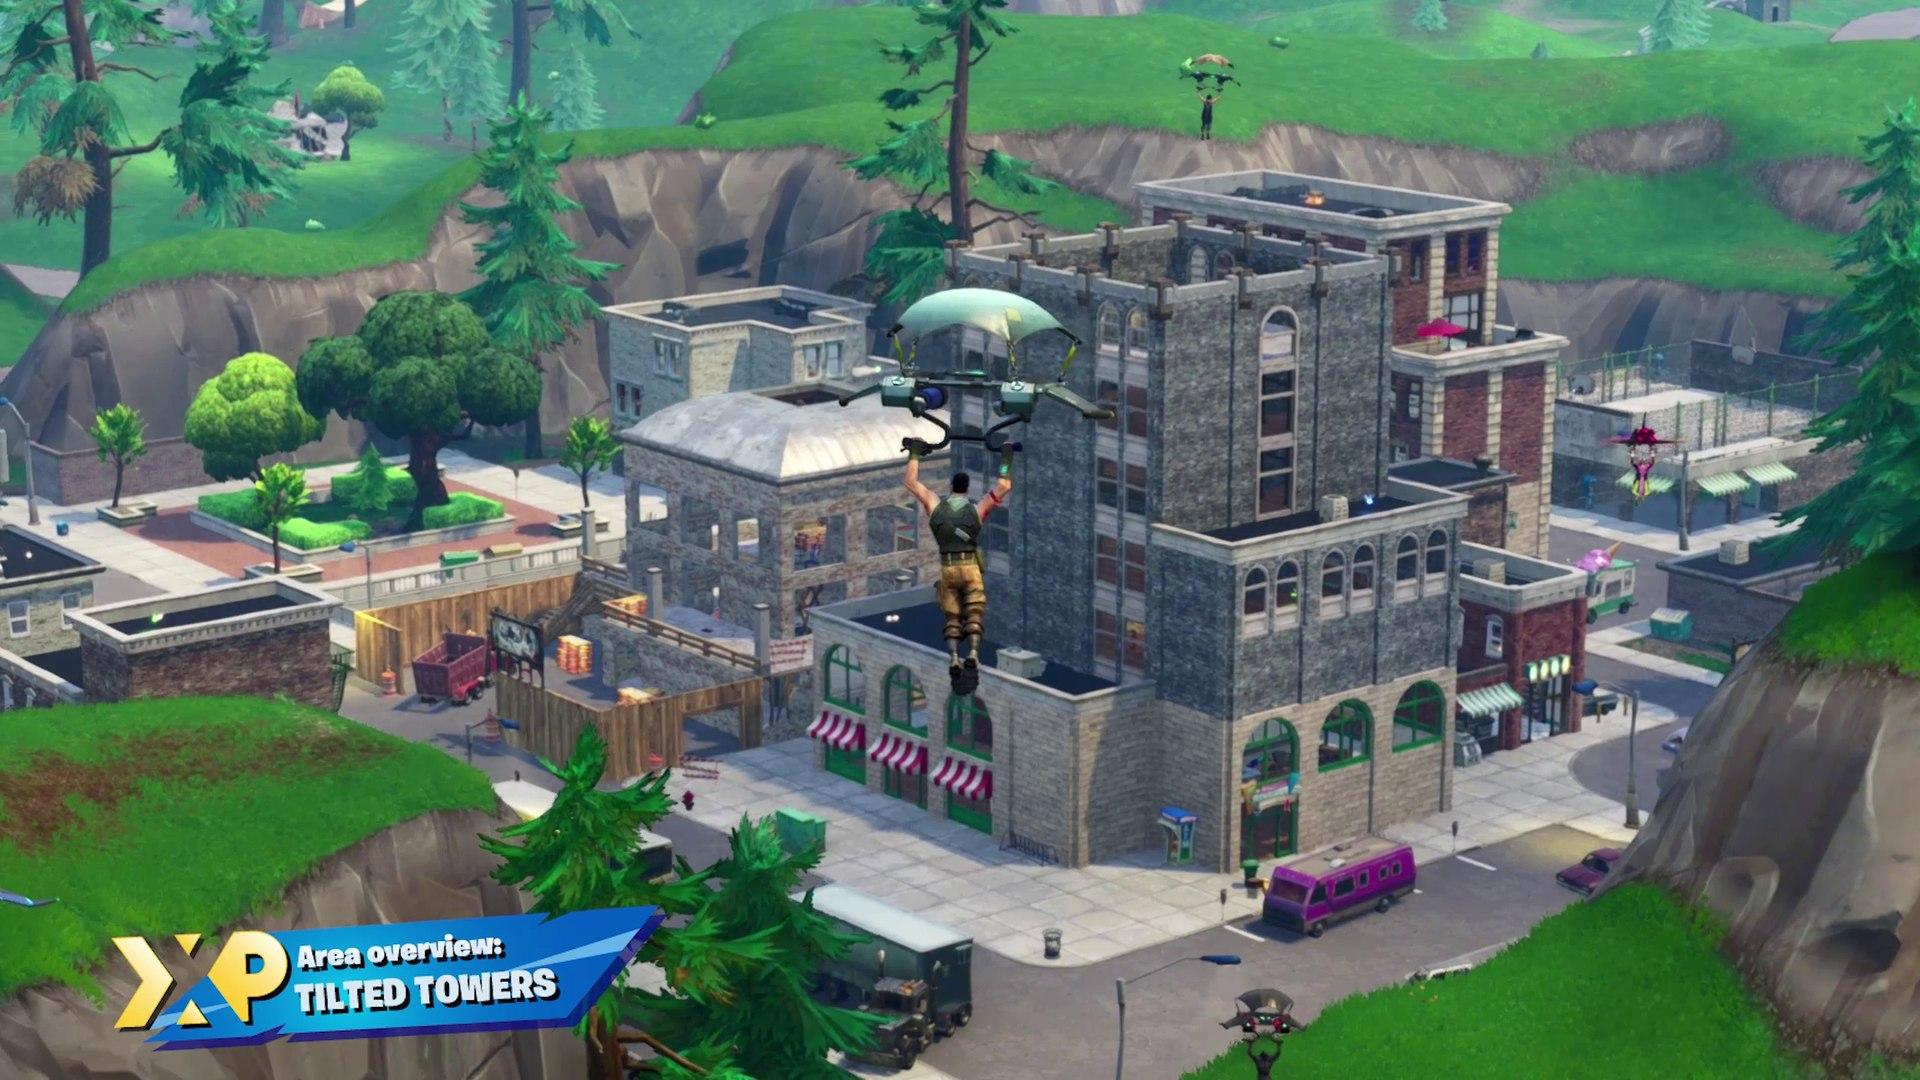 Download Fortnite Tilted Towers Wallpaper Hd Backgrounds Download Itl Cat - tilted towers roblox